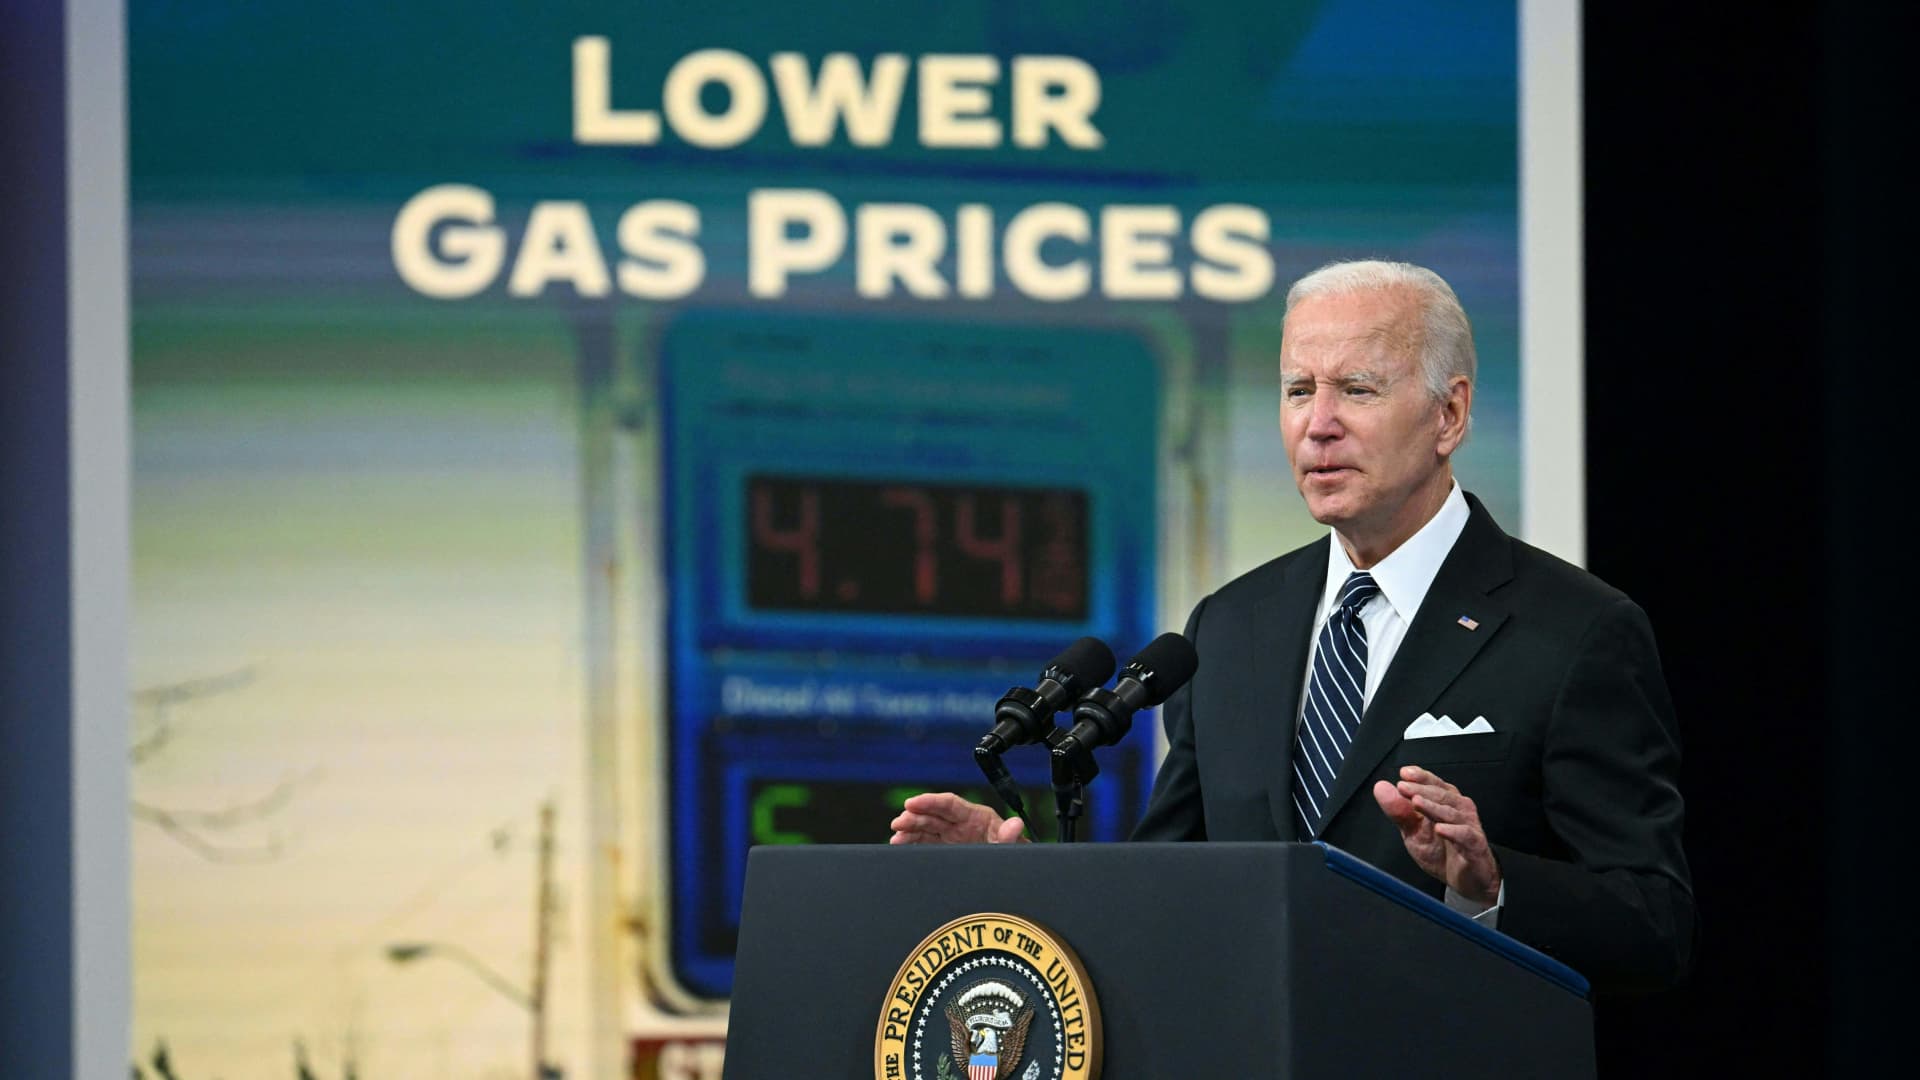 Biden to release 1 million barrels of gasoline to reduce prices at the pump ahead of July 4